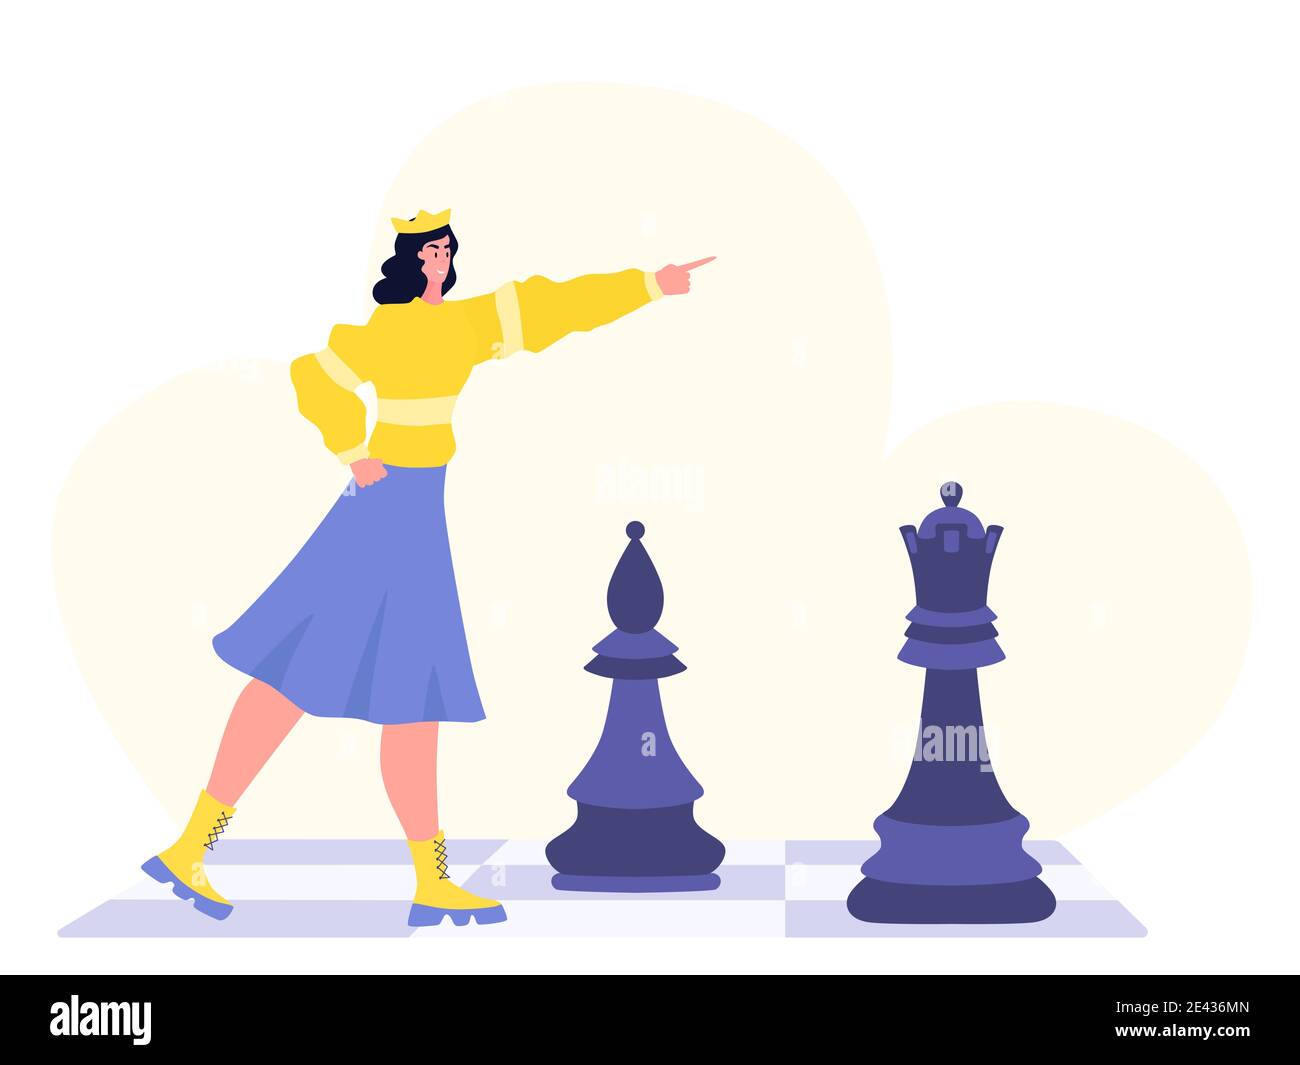 Chess Board with Piece Setup Flat Clip Art. Vector Illustration of Pawn,  Knight, Queen, Bishop, Horse, Rook Stock Vector - Illustration of knight,  concept: 193273942